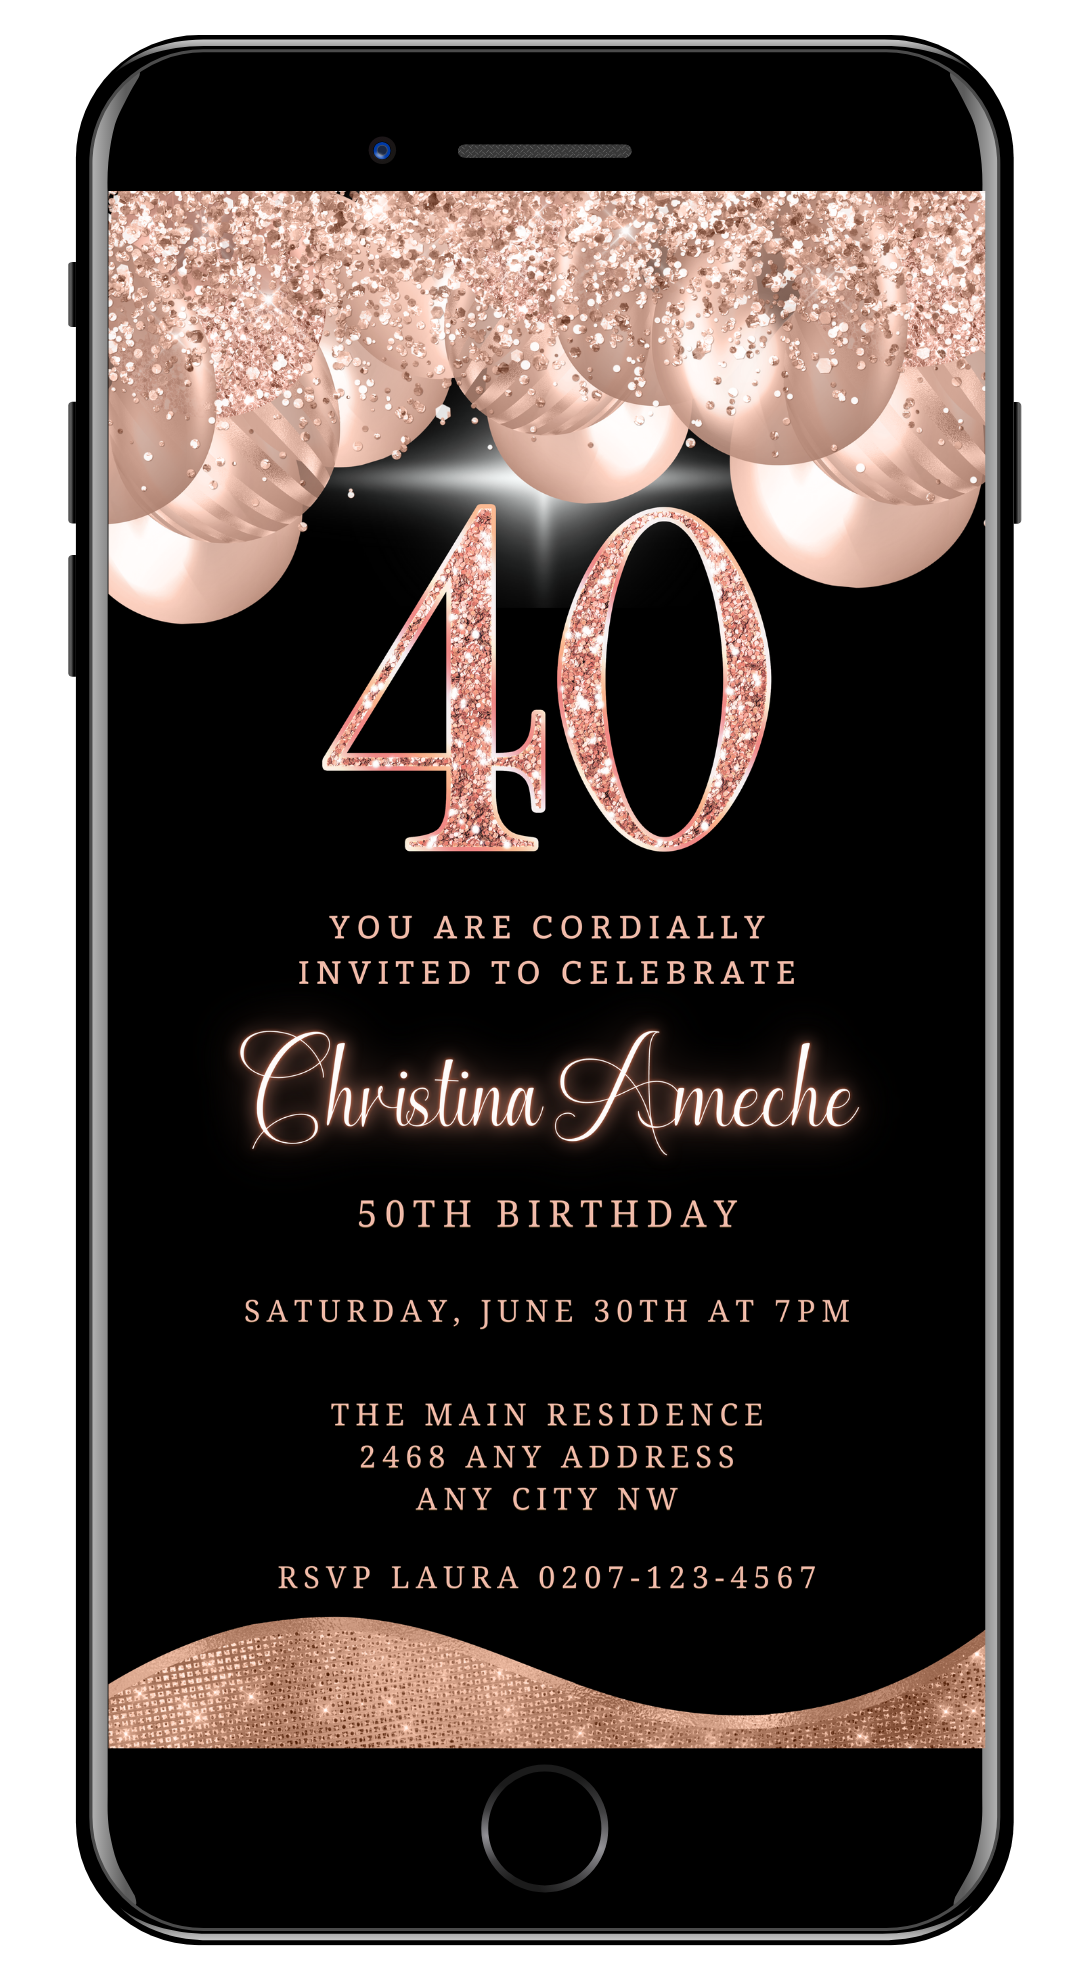 Customizable digital 40th birthday evite with rose gold glitter balloons, editable via Canva, displayed on a smartphone screen.